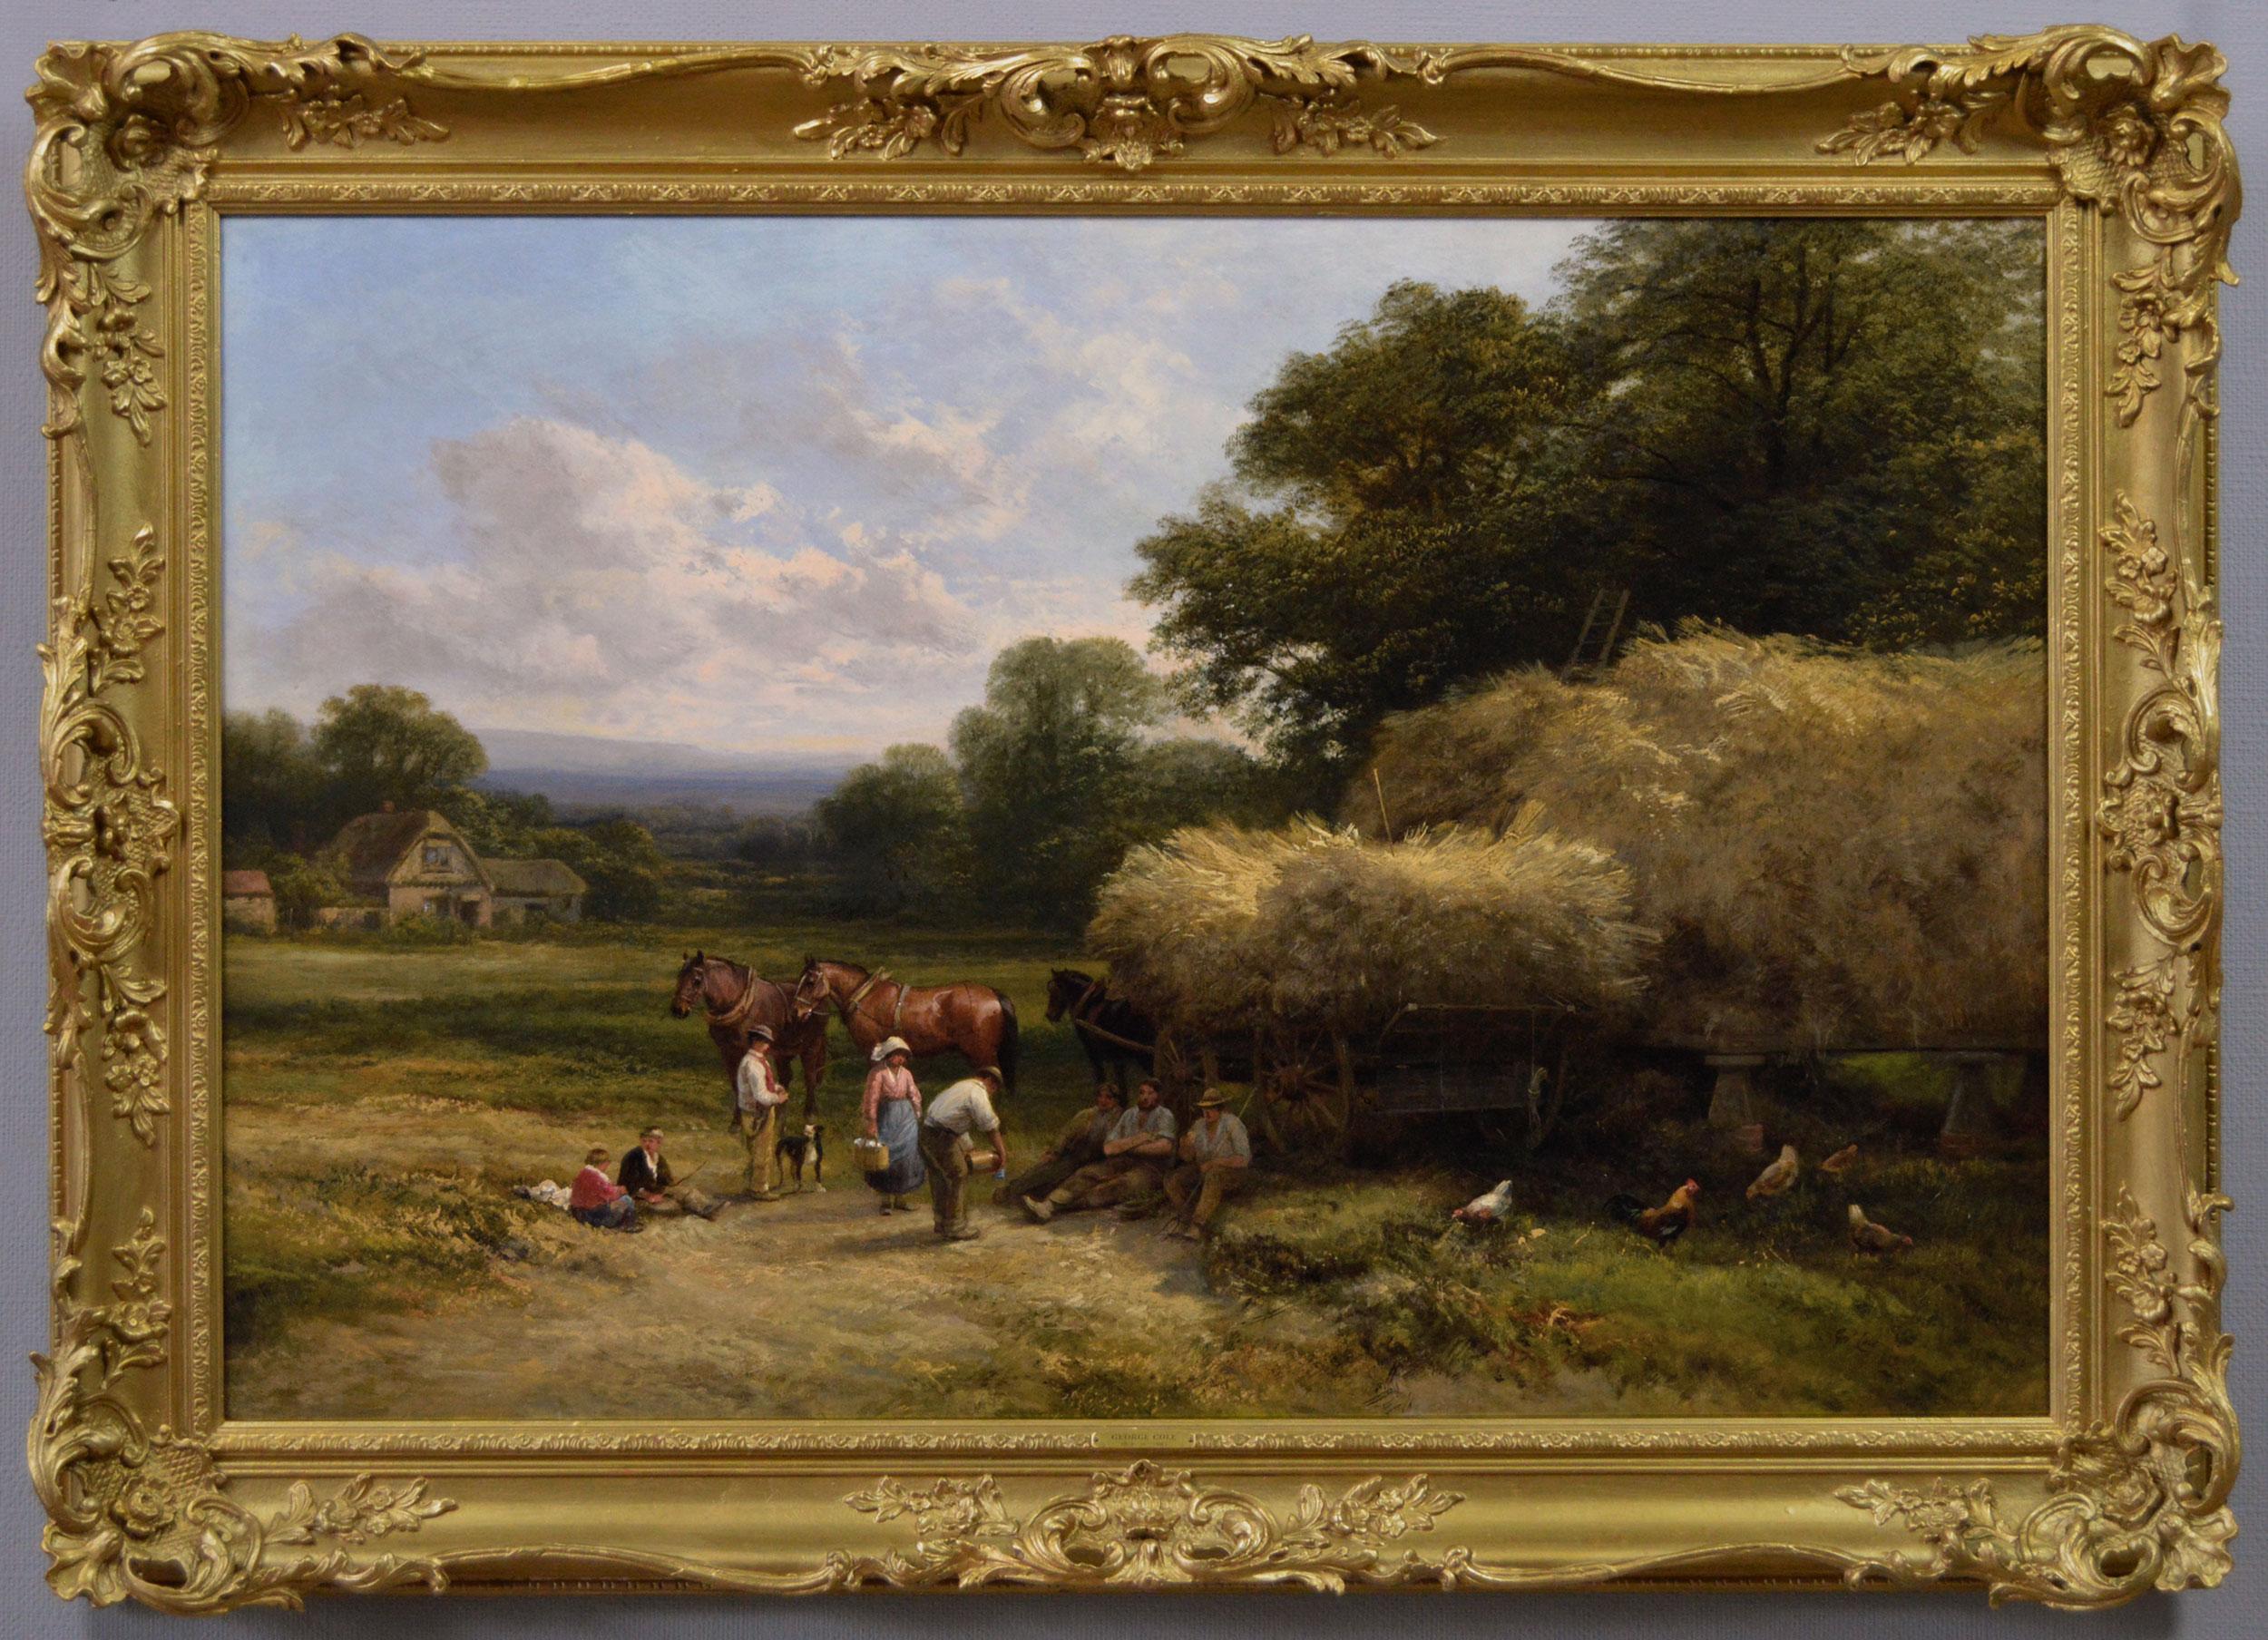 George Cole Animal Painting - 19th Century landscape genre oil painting of farmworkers with horses & a dog